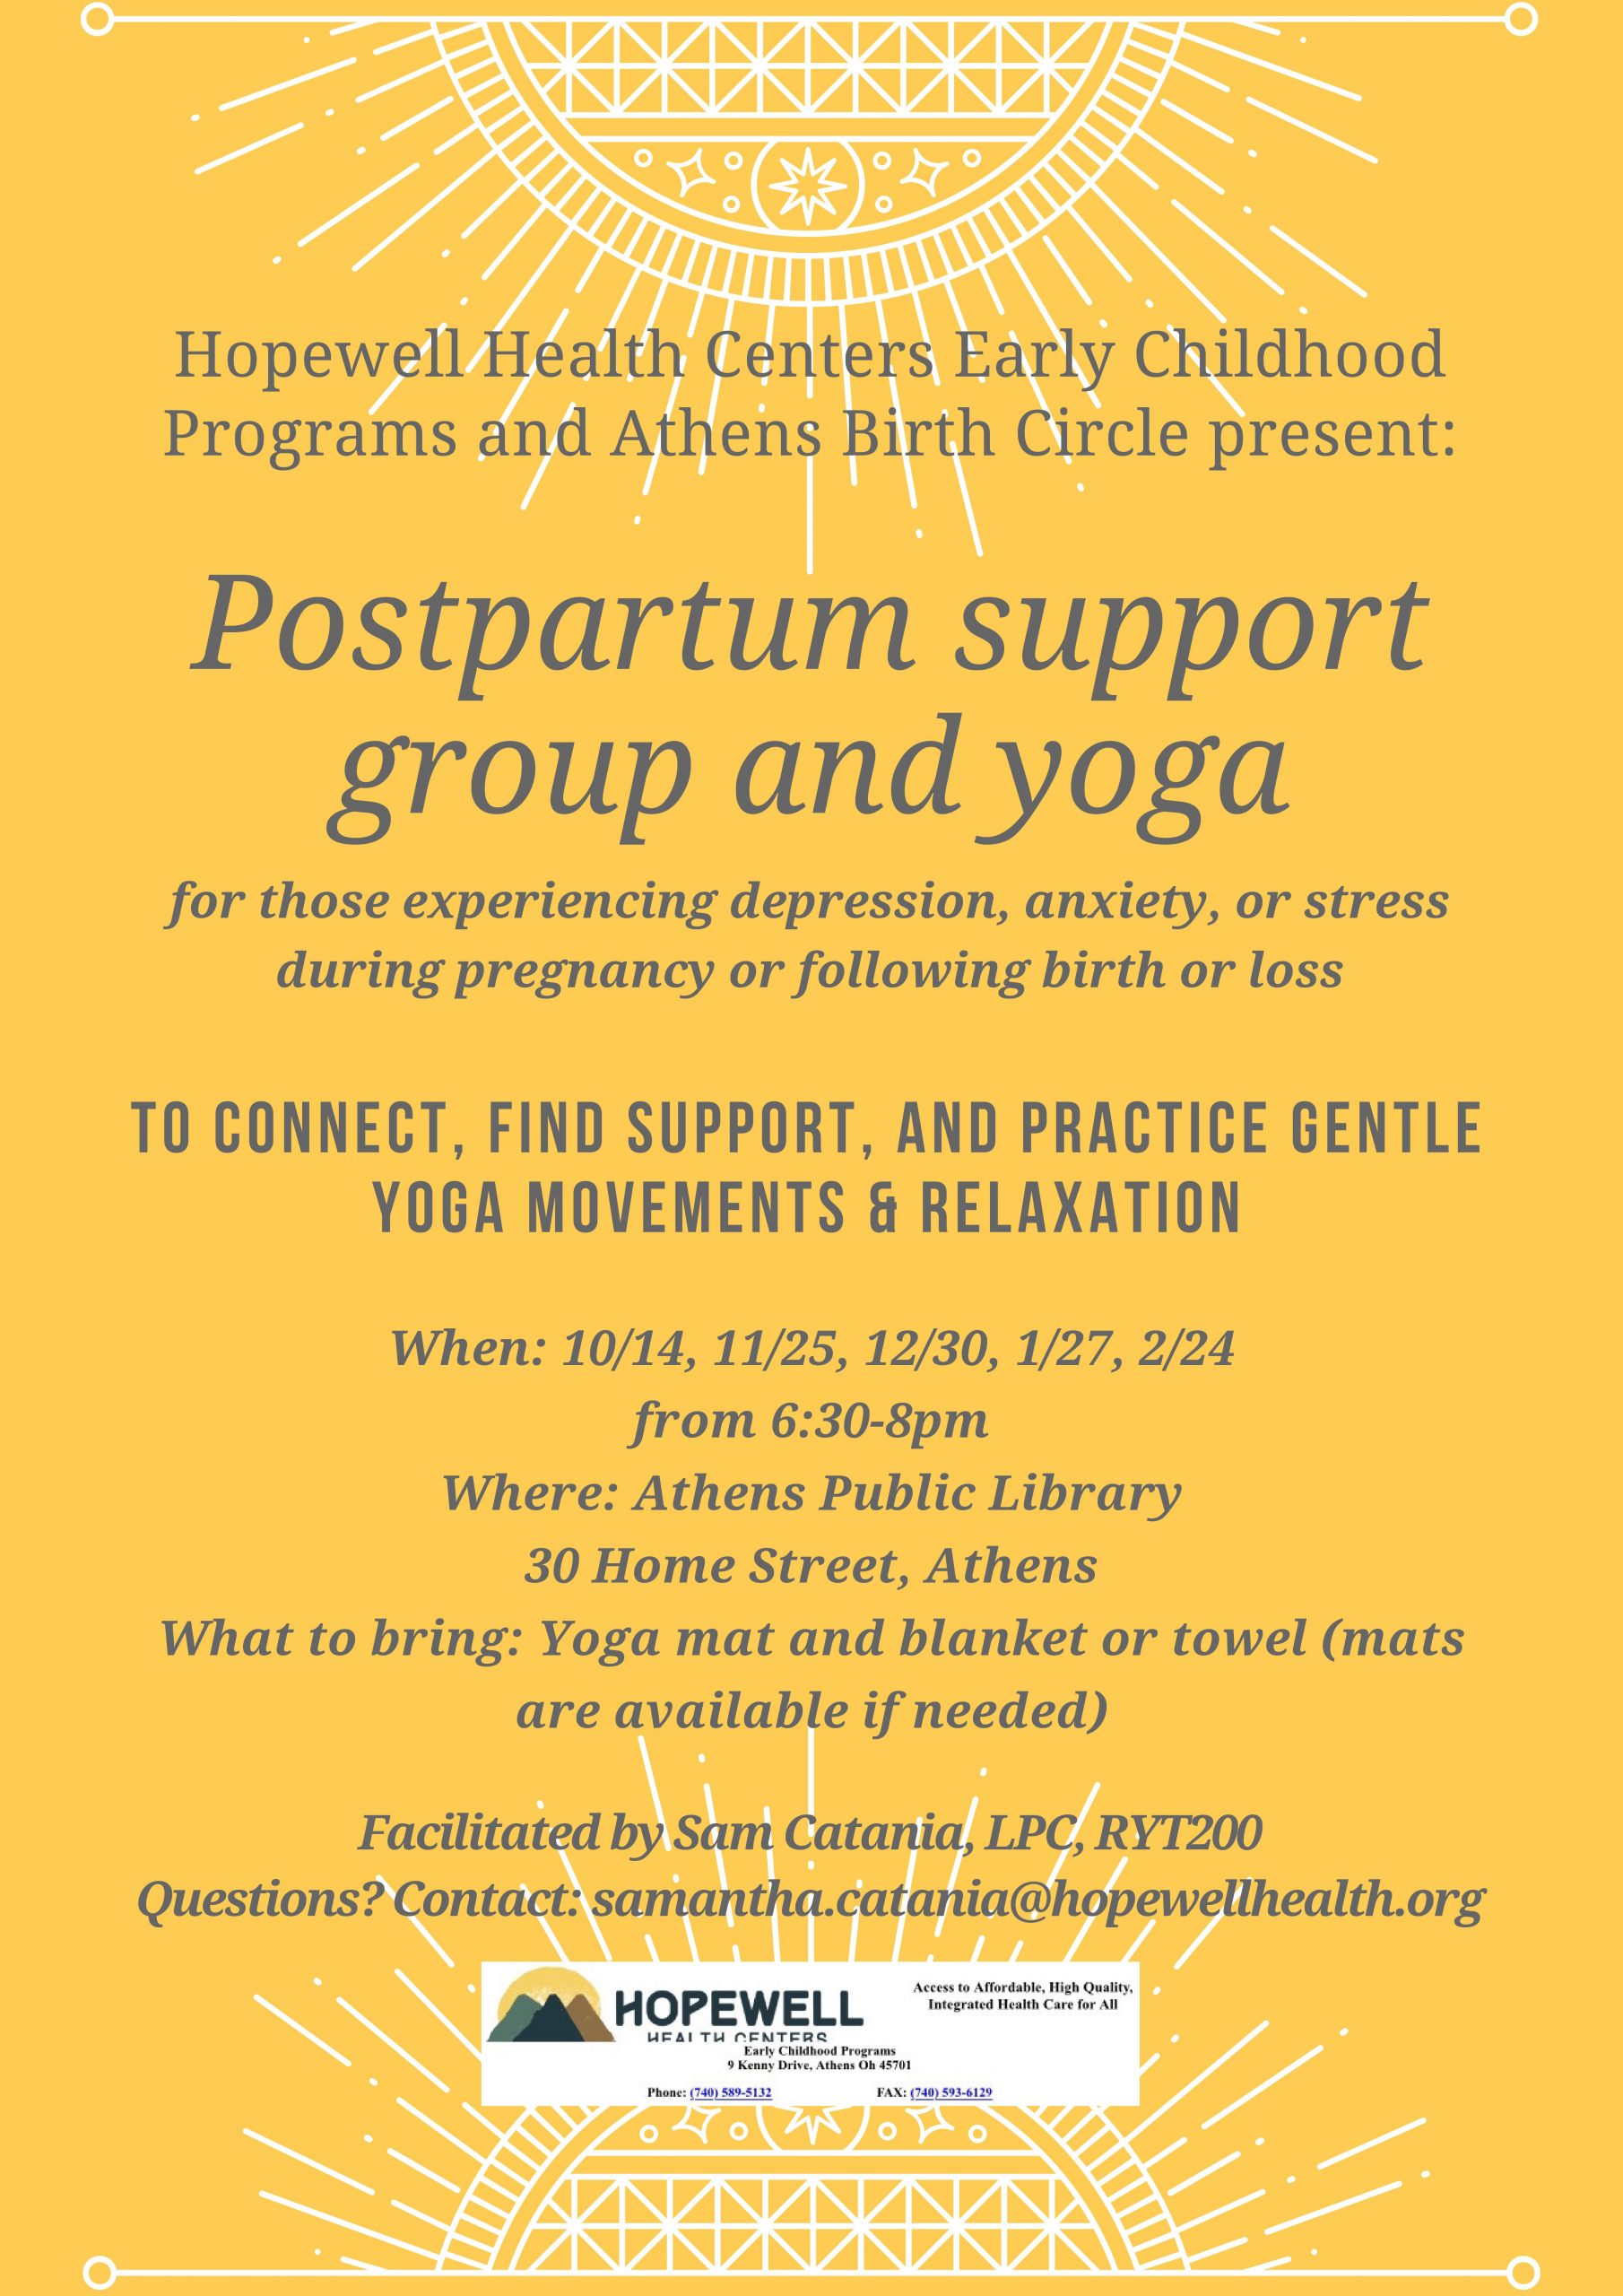 Postpartum support group and yoga flier